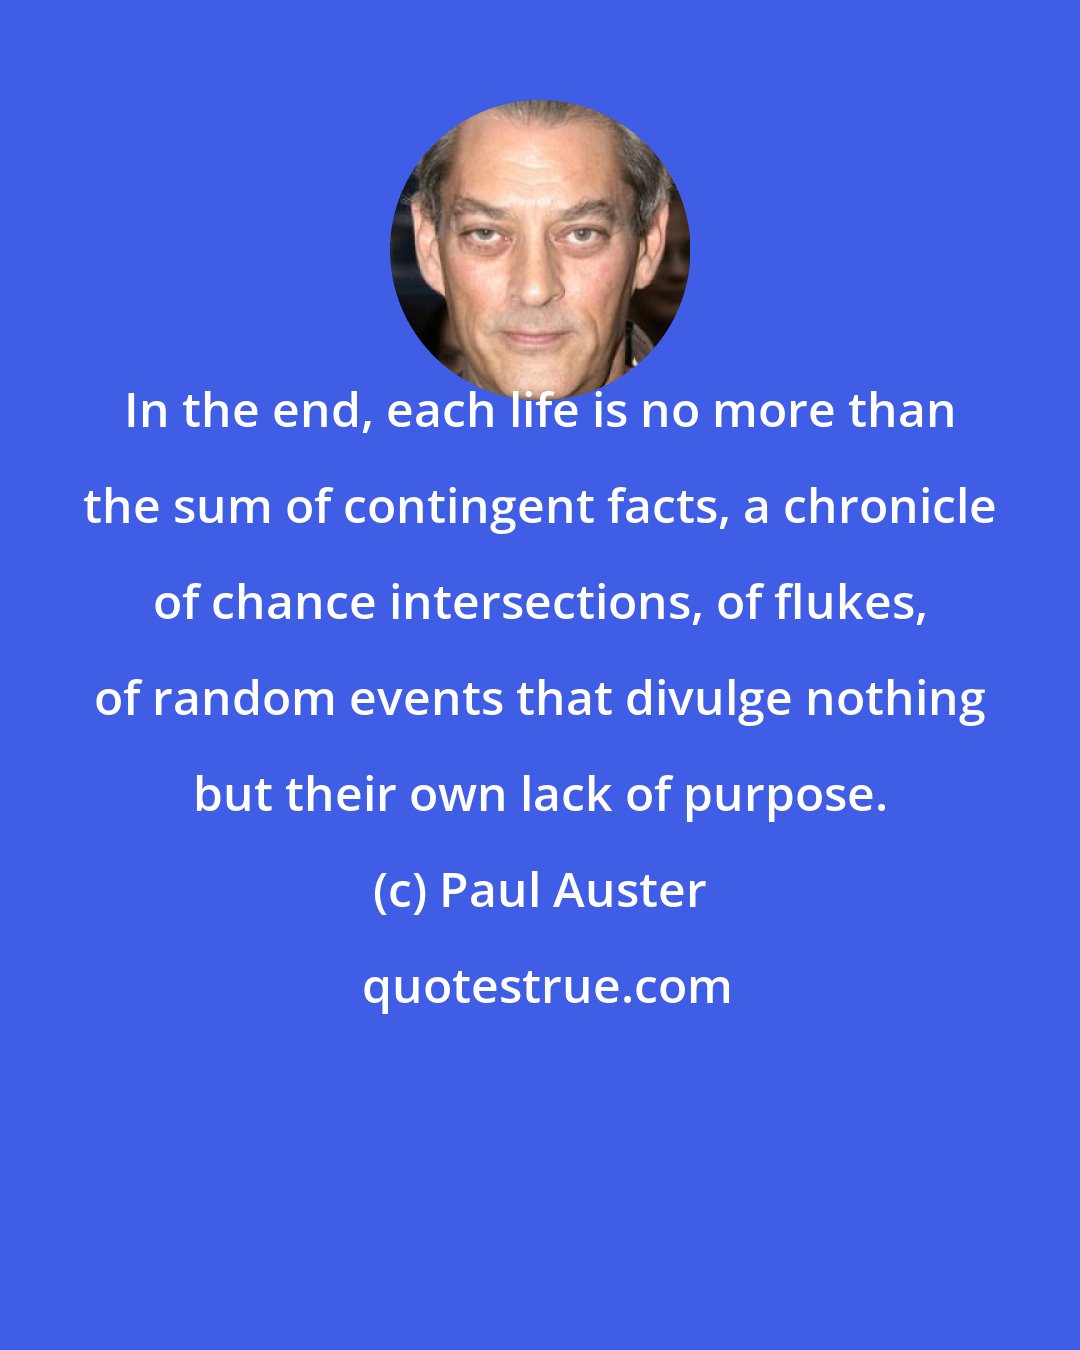 Paul Auster: In the end, each life is no more than the sum of contingent facts, a chronicle of chance intersections, of ﬂukes, of random events that divulge nothing but their own lack of purpose.